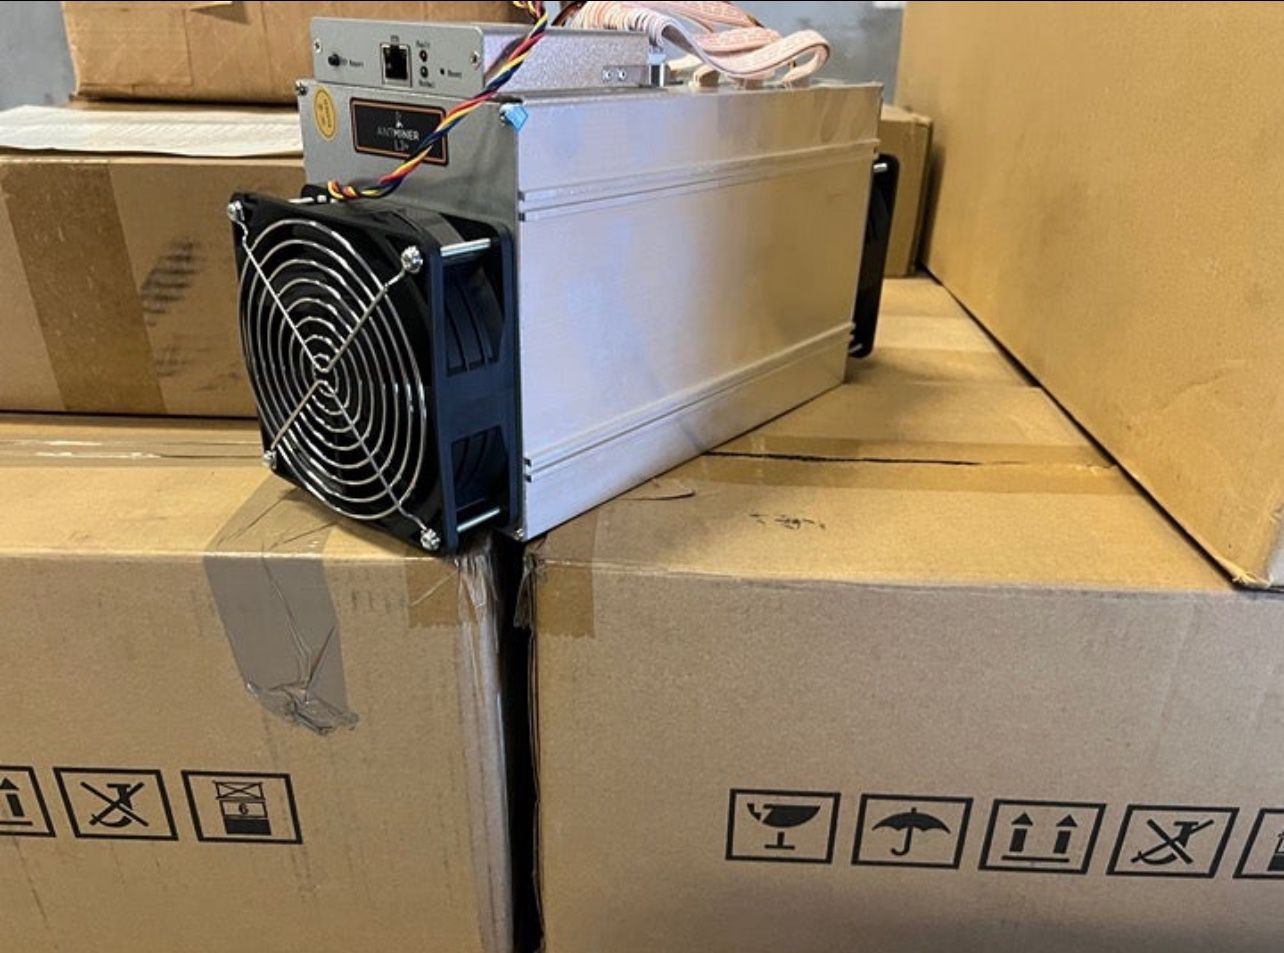 Cryptocurrency ASIC Miner Bitmain Antminer + PSU Power Unit (all NEW IN BOX)!